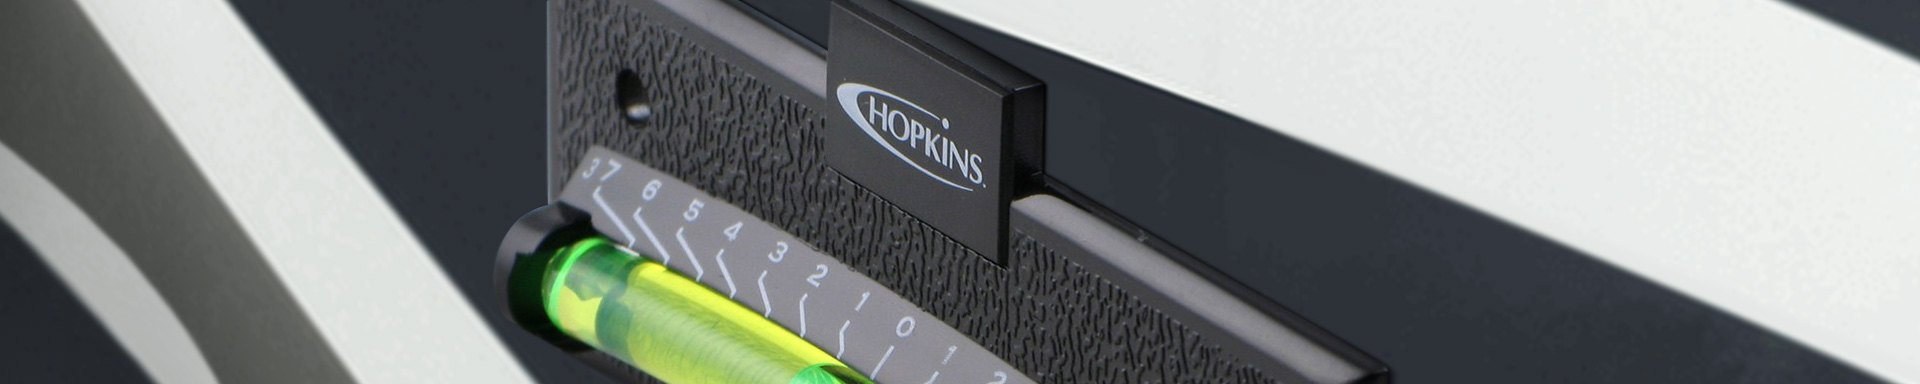 Hopkins Towing Battery Chargers & Jump Starters